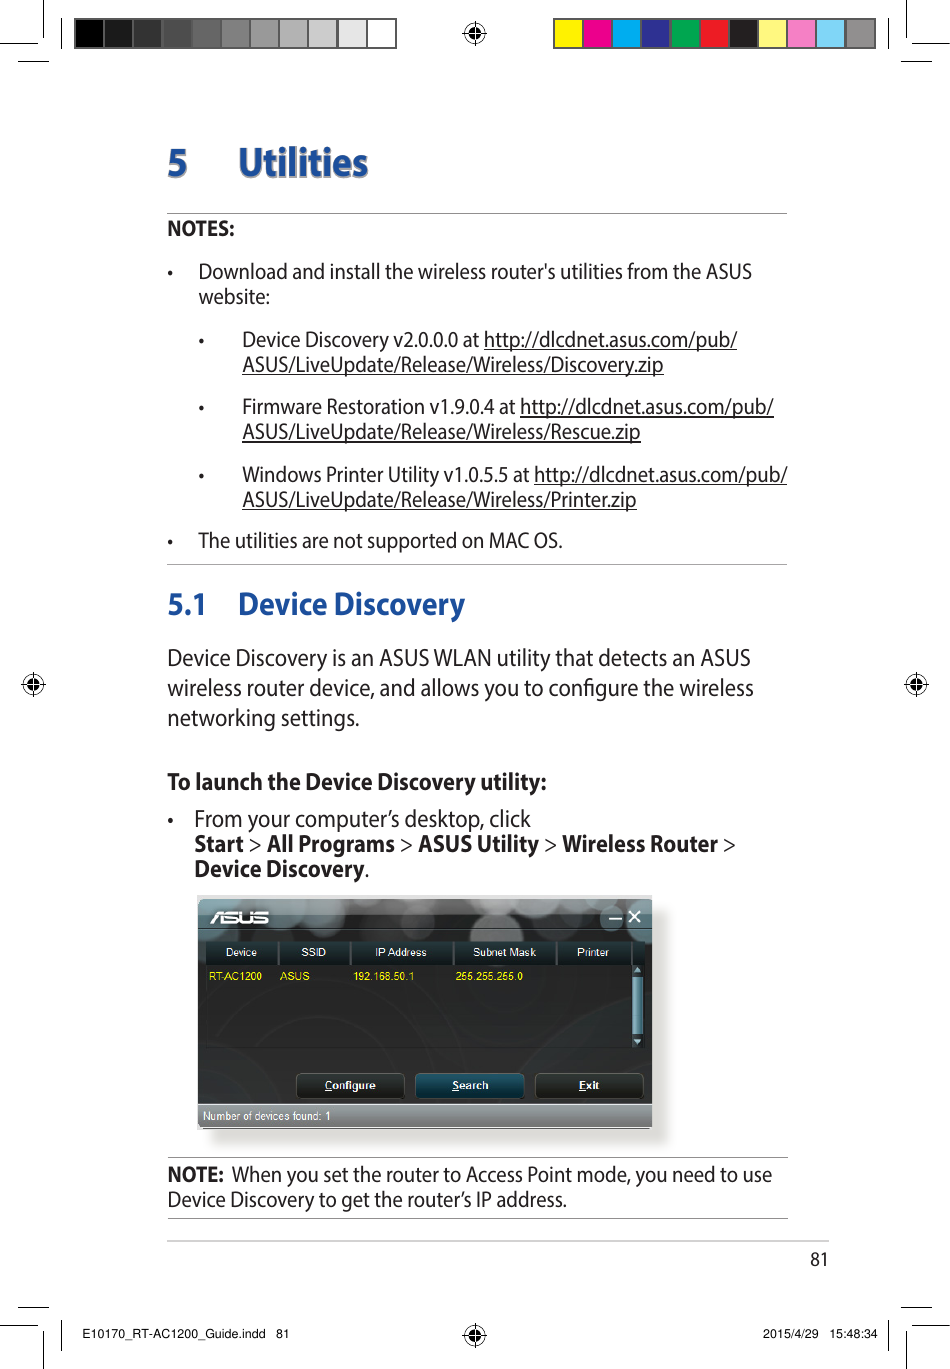 815 UtilitiesNOTES: • Downloadandinstallthewirelessrouter&apos;sutilitiesfromtheASUSwebsite: • DeviceDiscoveryv2.0.0.0athttp://dlcdnet.asus.com/pub/ASUS/LiveUpdate/Release/Wireless/Discovery.zip • FirmwareRestorationv1.9.0.4athttp://dlcdnet.asus.com/pub/ASUS/LiveUpdate/Release/Wireless/Rescue.zip • WindowsPrinterUtilityv1.0.5.5athttp://dlcdnet.asus.com/pub/ASUS/LiveUpdate/Release/Wireless/Printer.zip• TheutilitiesarenotsupportedonMACOS.5.1  Device DiscoveryDevice Discovery is an ASUS WLAN utility that detects an ASUS wireless router device, and allows you to congure the wireless networking settings.To launch the Device Discovery utility:• Fromyourcomputer’sdesktop,click Start &gt; All Programs &gt; ASUS Utility &gt; Wireless Router &gt; Device Discovery.NOTE:  When you set the router to Access Point mode, you need to use Device Discovery to get the router’s IP address.E10170_RT-AC1200_Guide.indd   81 2015/4/29   15:48:34